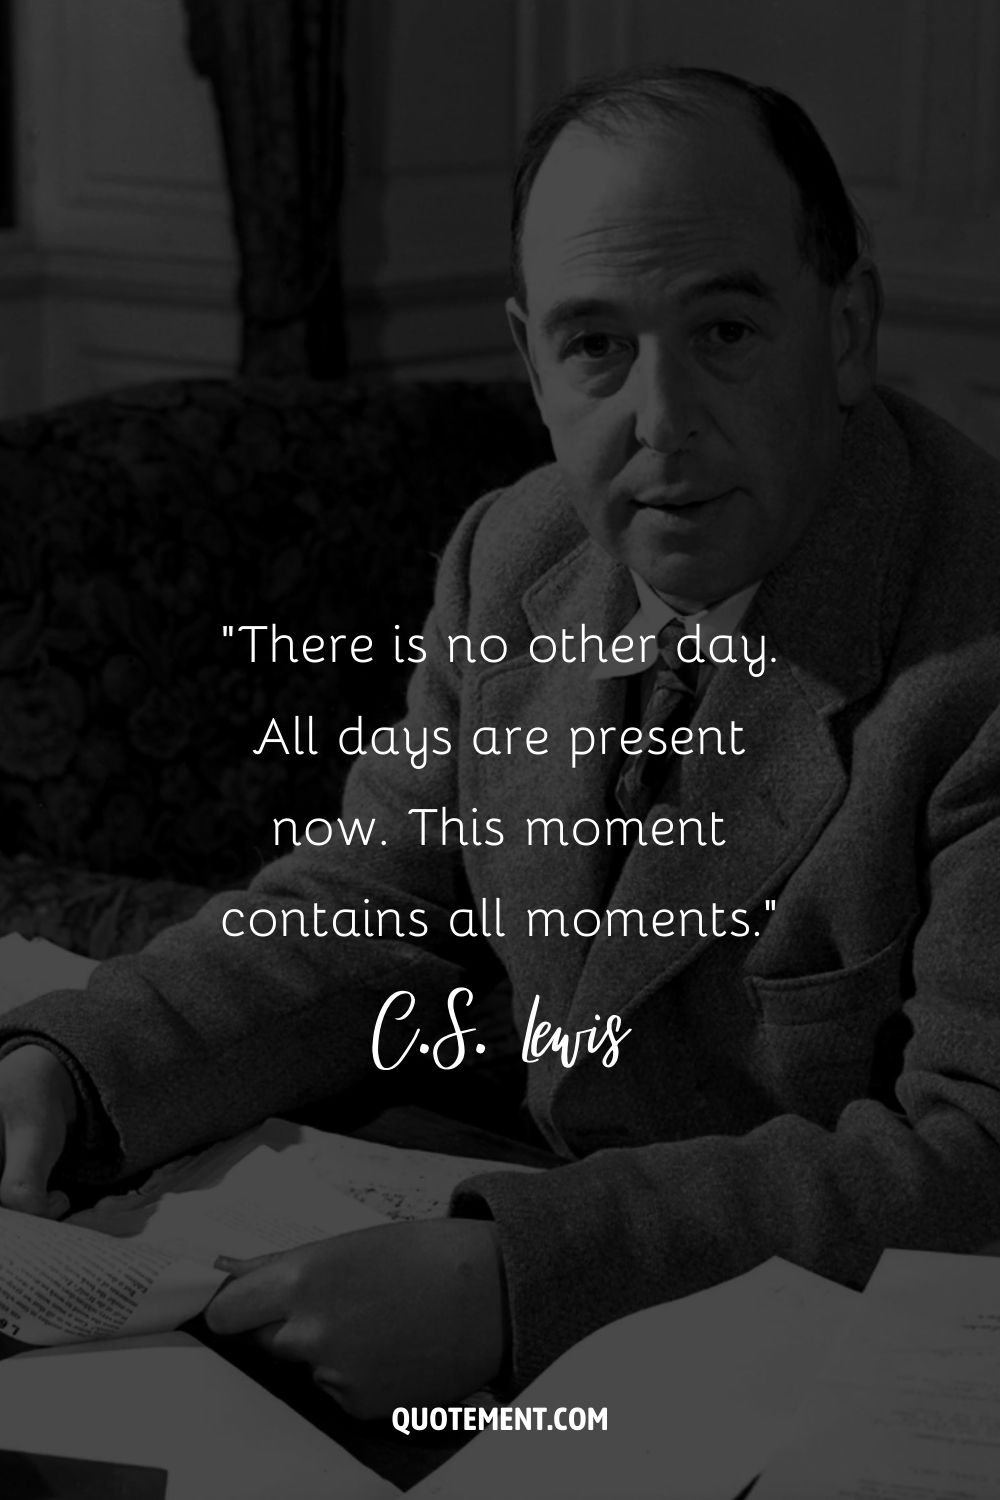 C.S. Lewis posing at the desk holding a script in hand